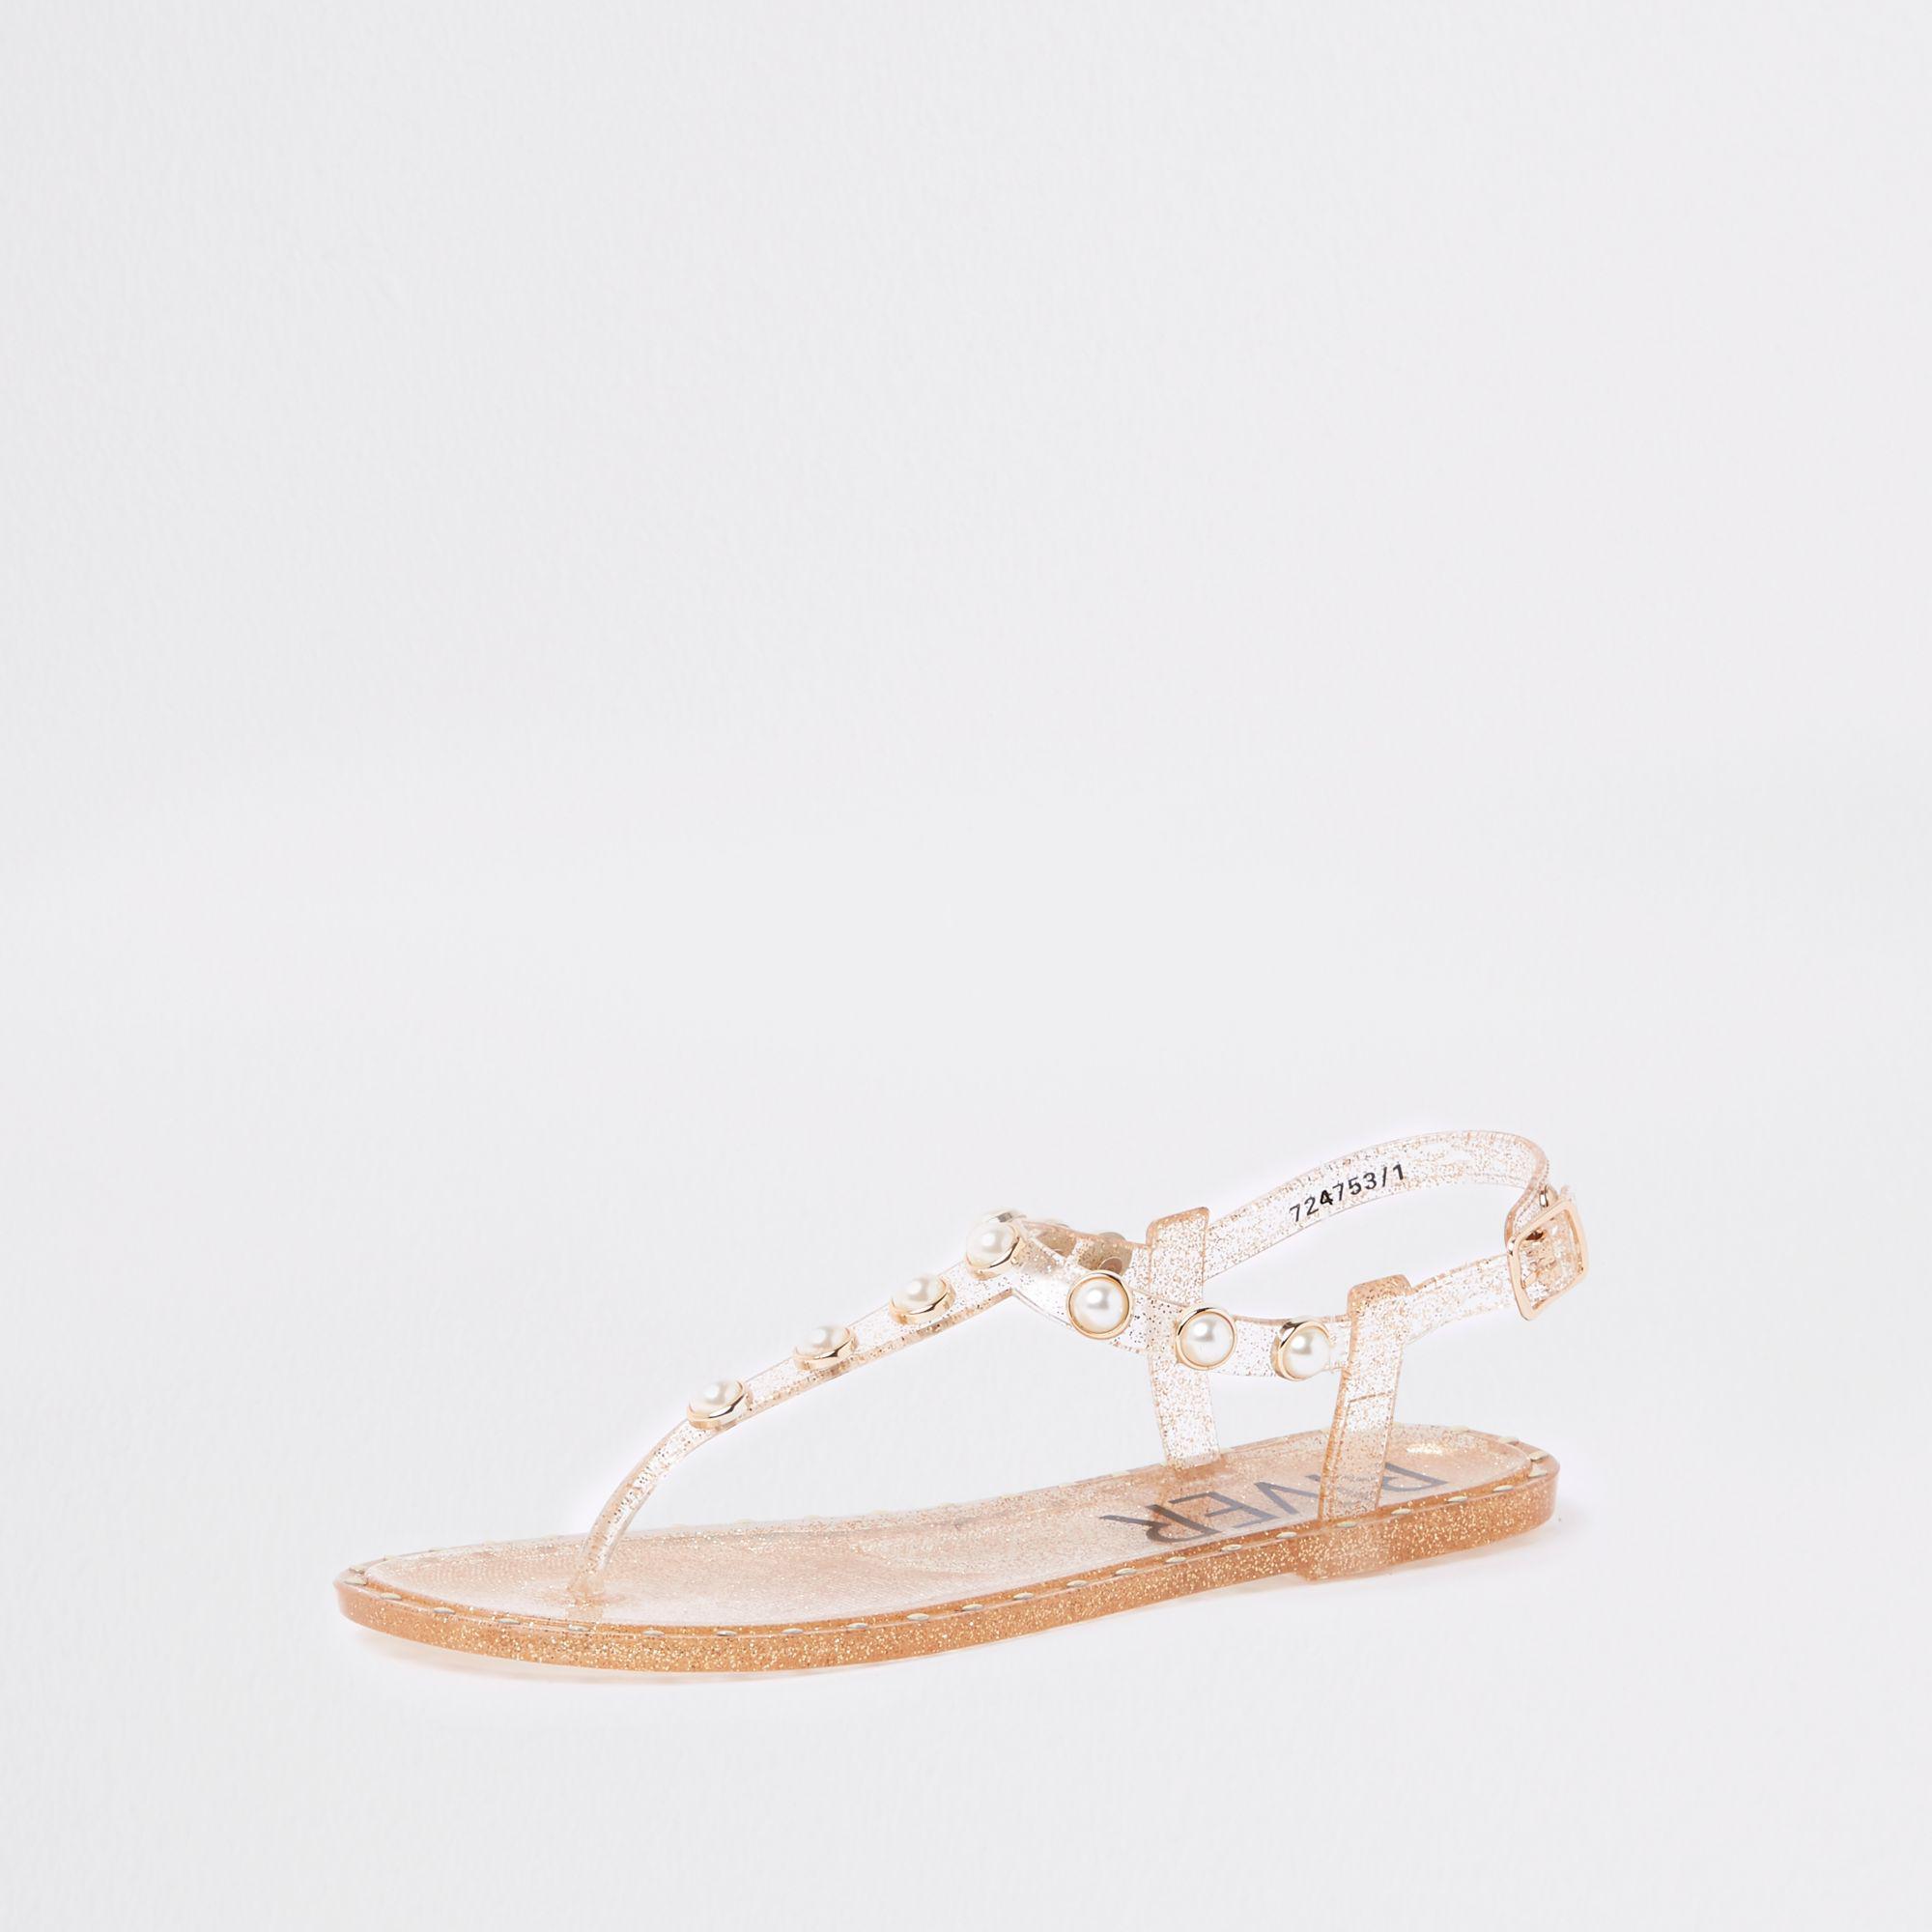 River Island Pearl Embellished Jelly Sandals in Gold (Metallic) - Lyst